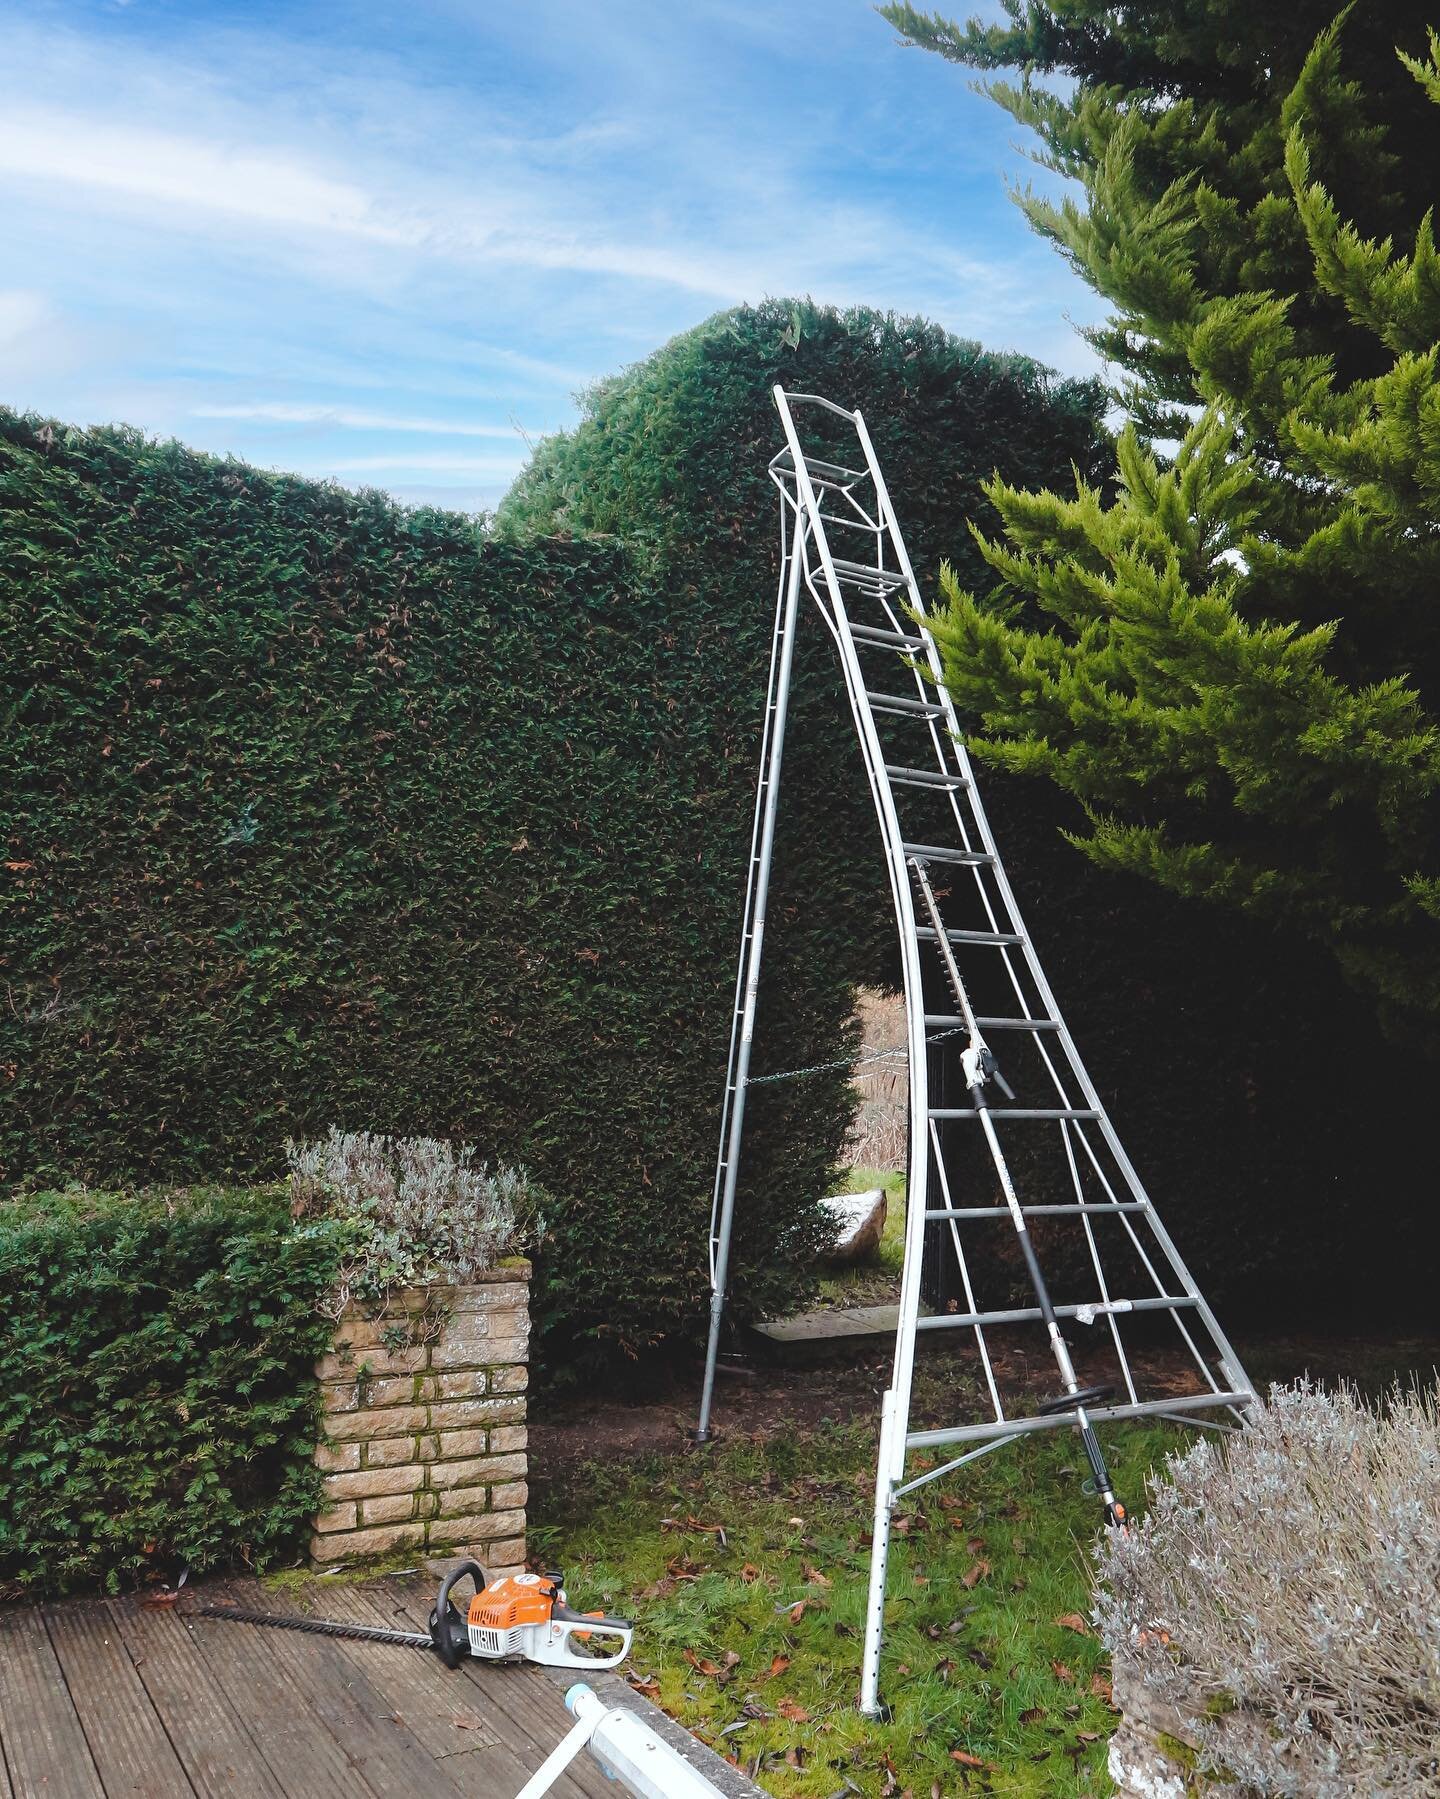 Hedge maintenance at one of our regular jobs 🌳

For any questions you have or if you wish to organise a quote with us please feel free to contact directly on 07450272704 / jsjgardening@gmail.com or drop me a message on here. Look forward to hearing 